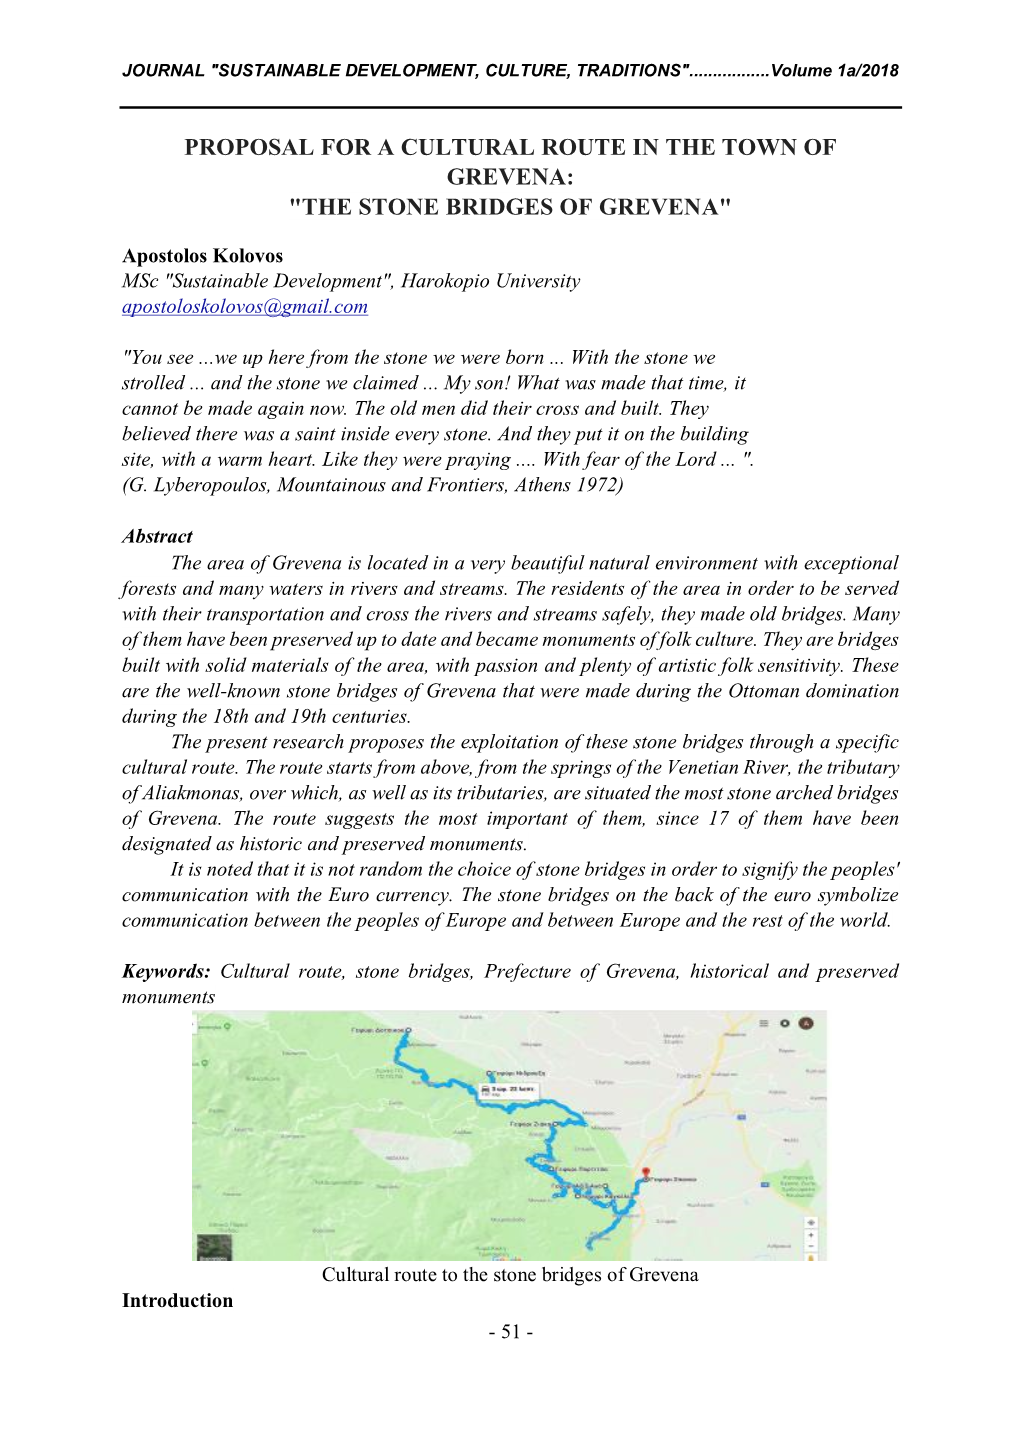 Proposal for a Cultural Route in the Town of Grevena: "The Stone Bridges of Grevena"